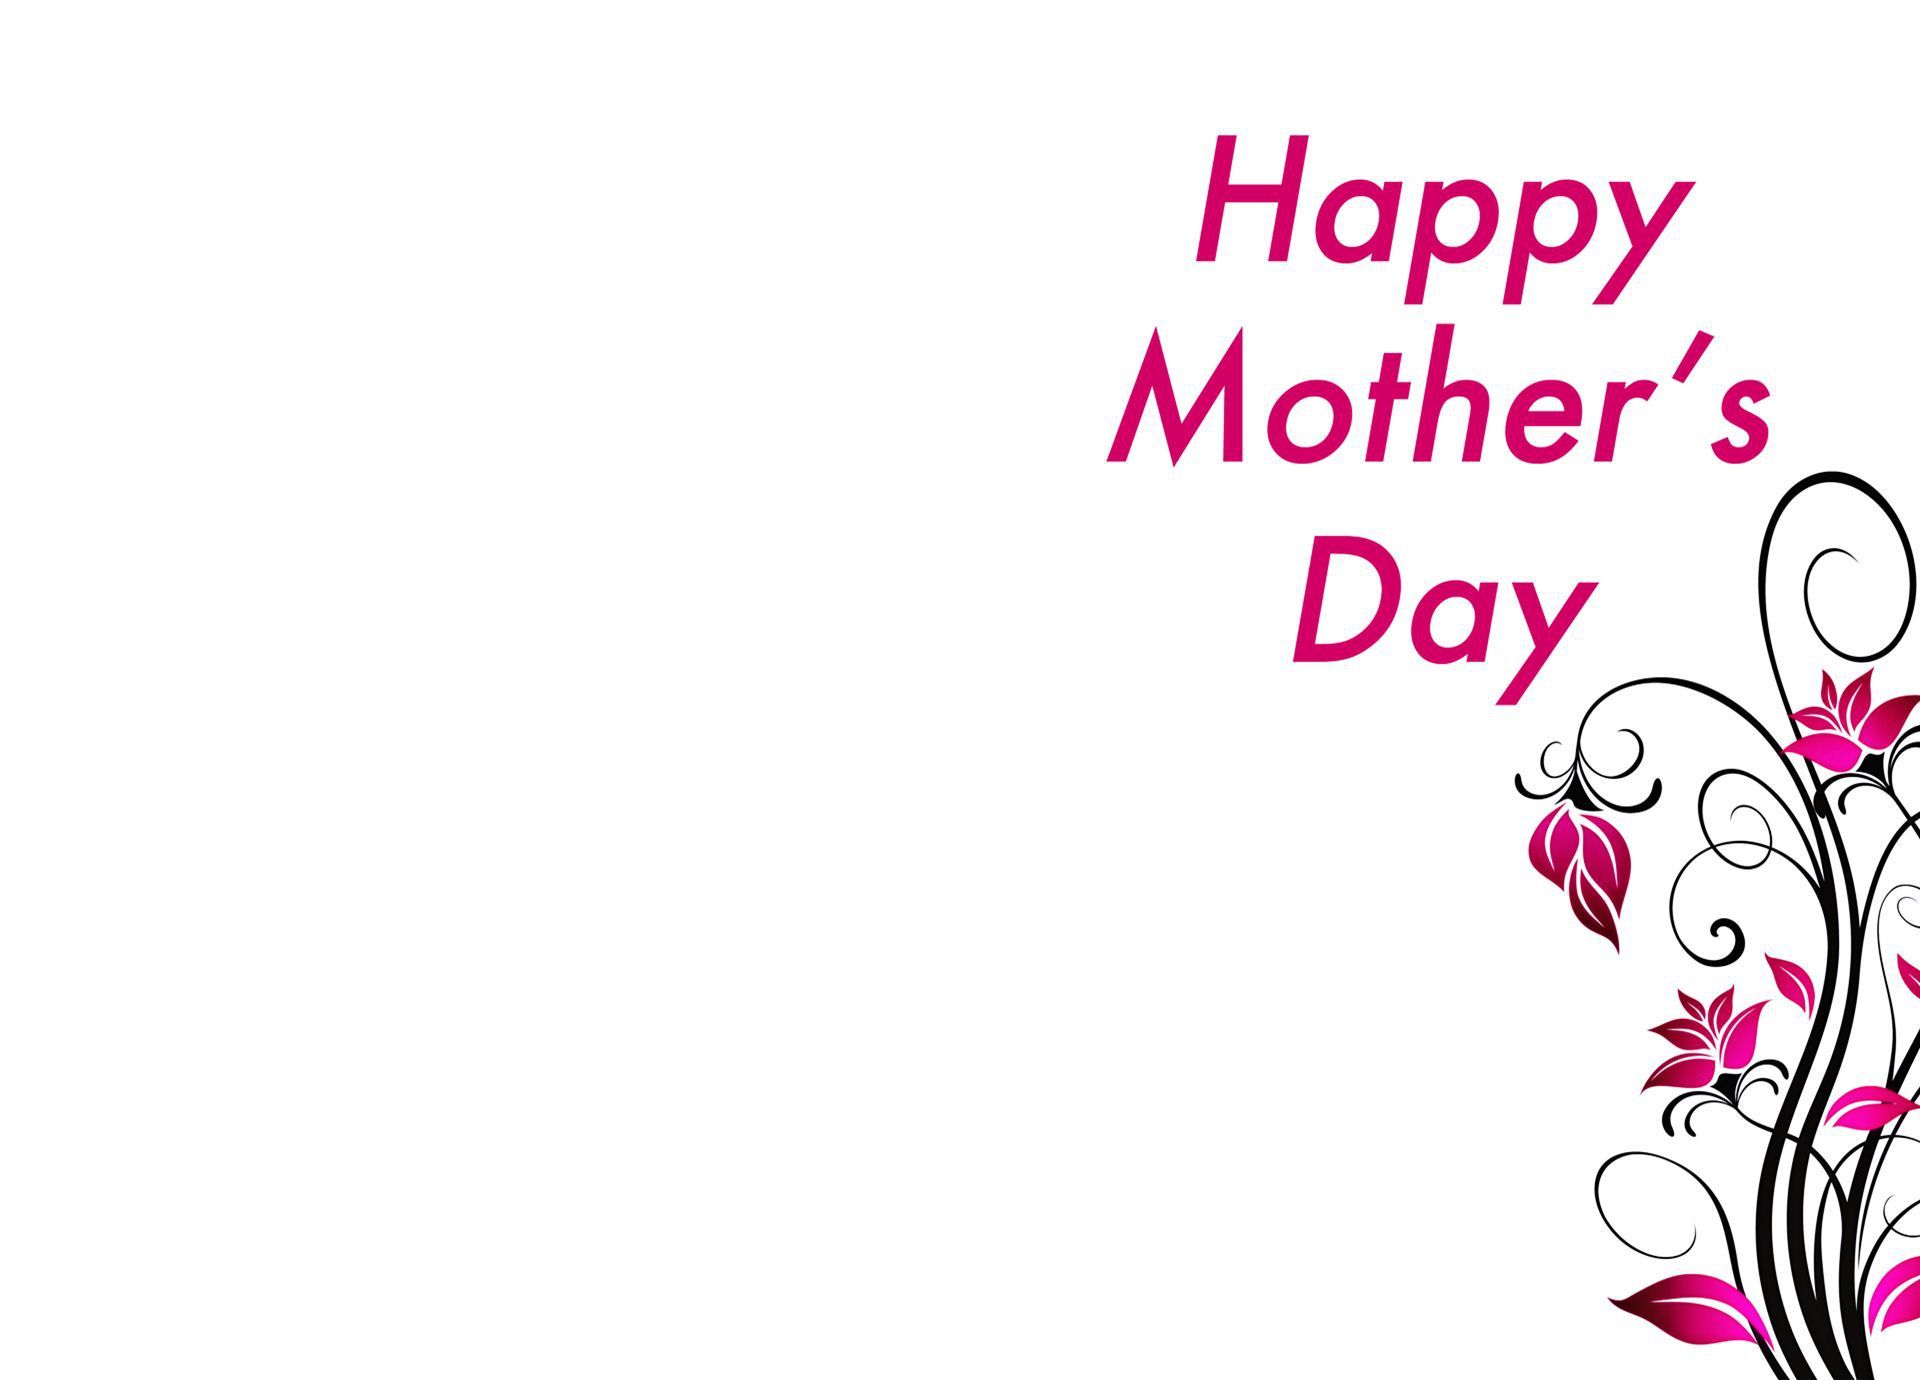 Mothers Day Background Free. Mother's day background, Happy mothers day image, Mothers day card